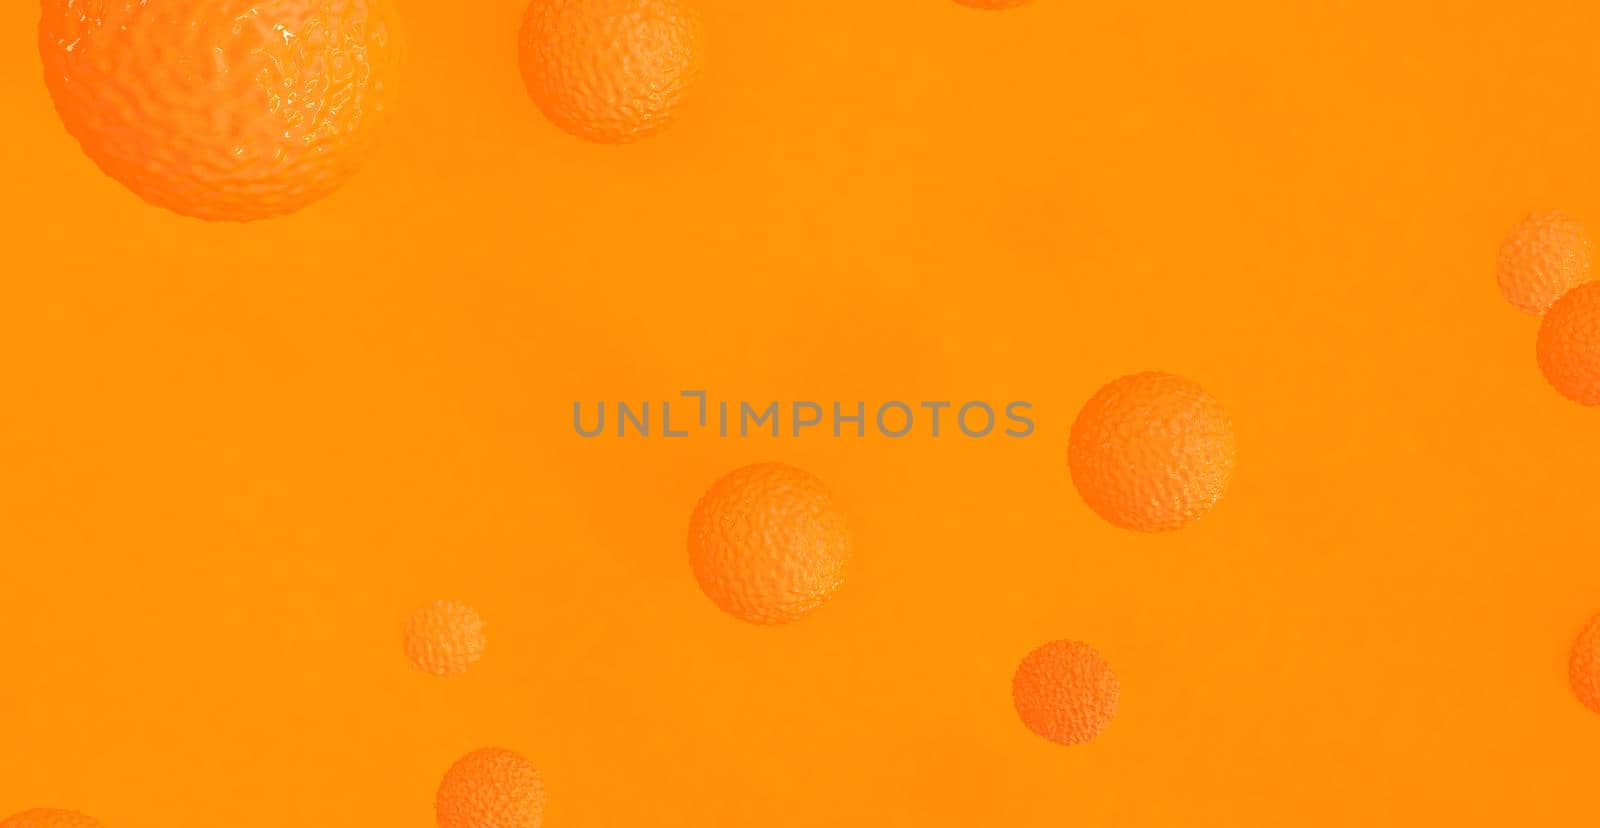 Abstract orange background with dynamic 3d spheres. orange and yellow balloons on an orange background. Modern trendy banner or poster design 3D image, copy space.